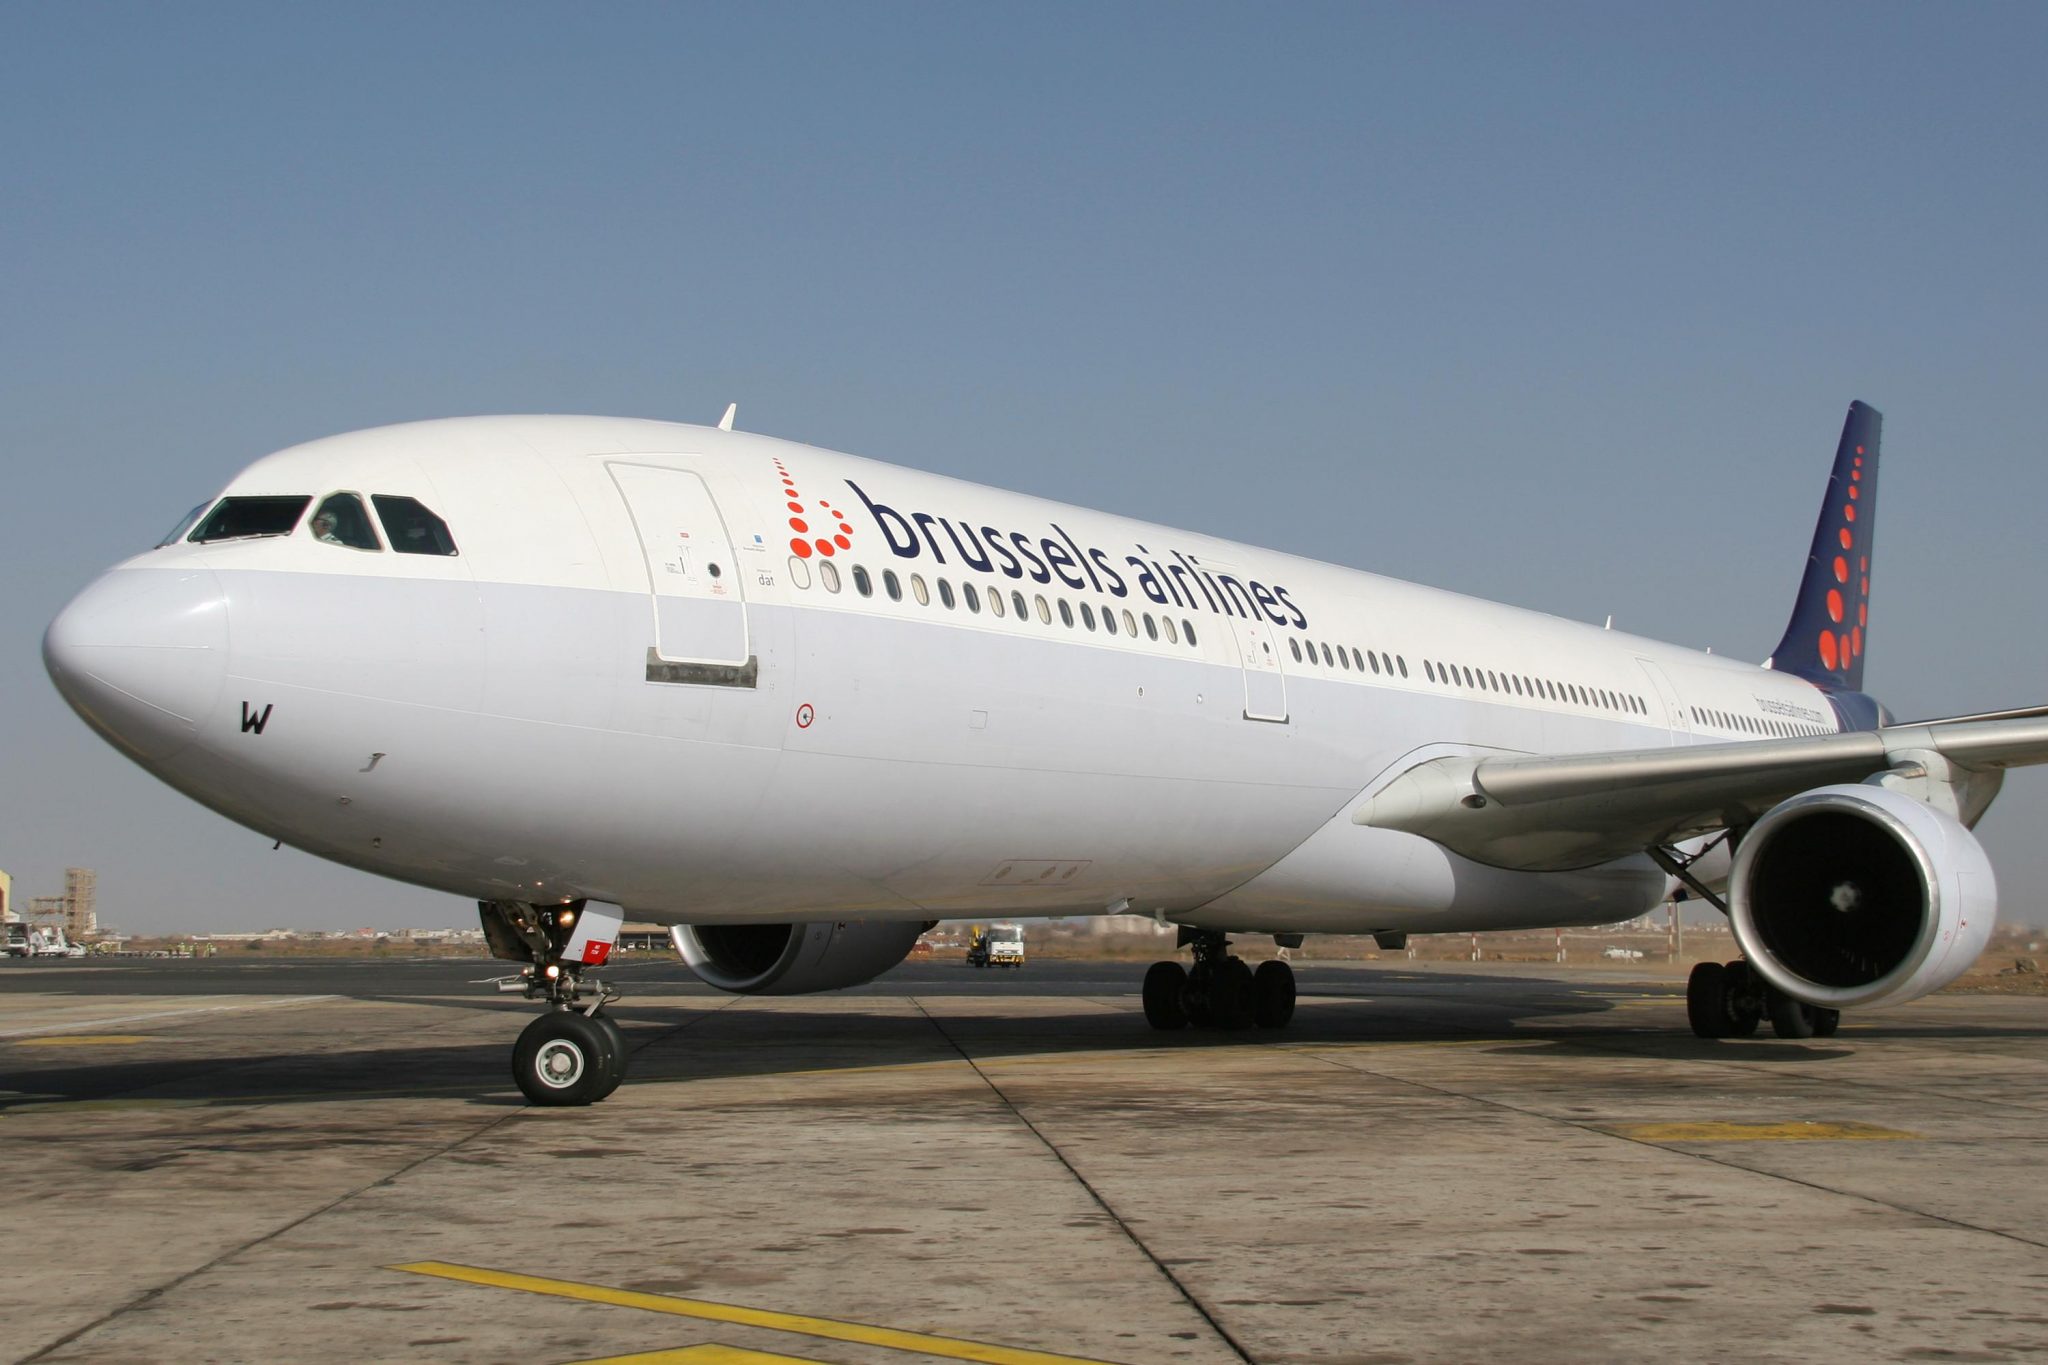 Brussels Airlines reports a half-year EBIT loss